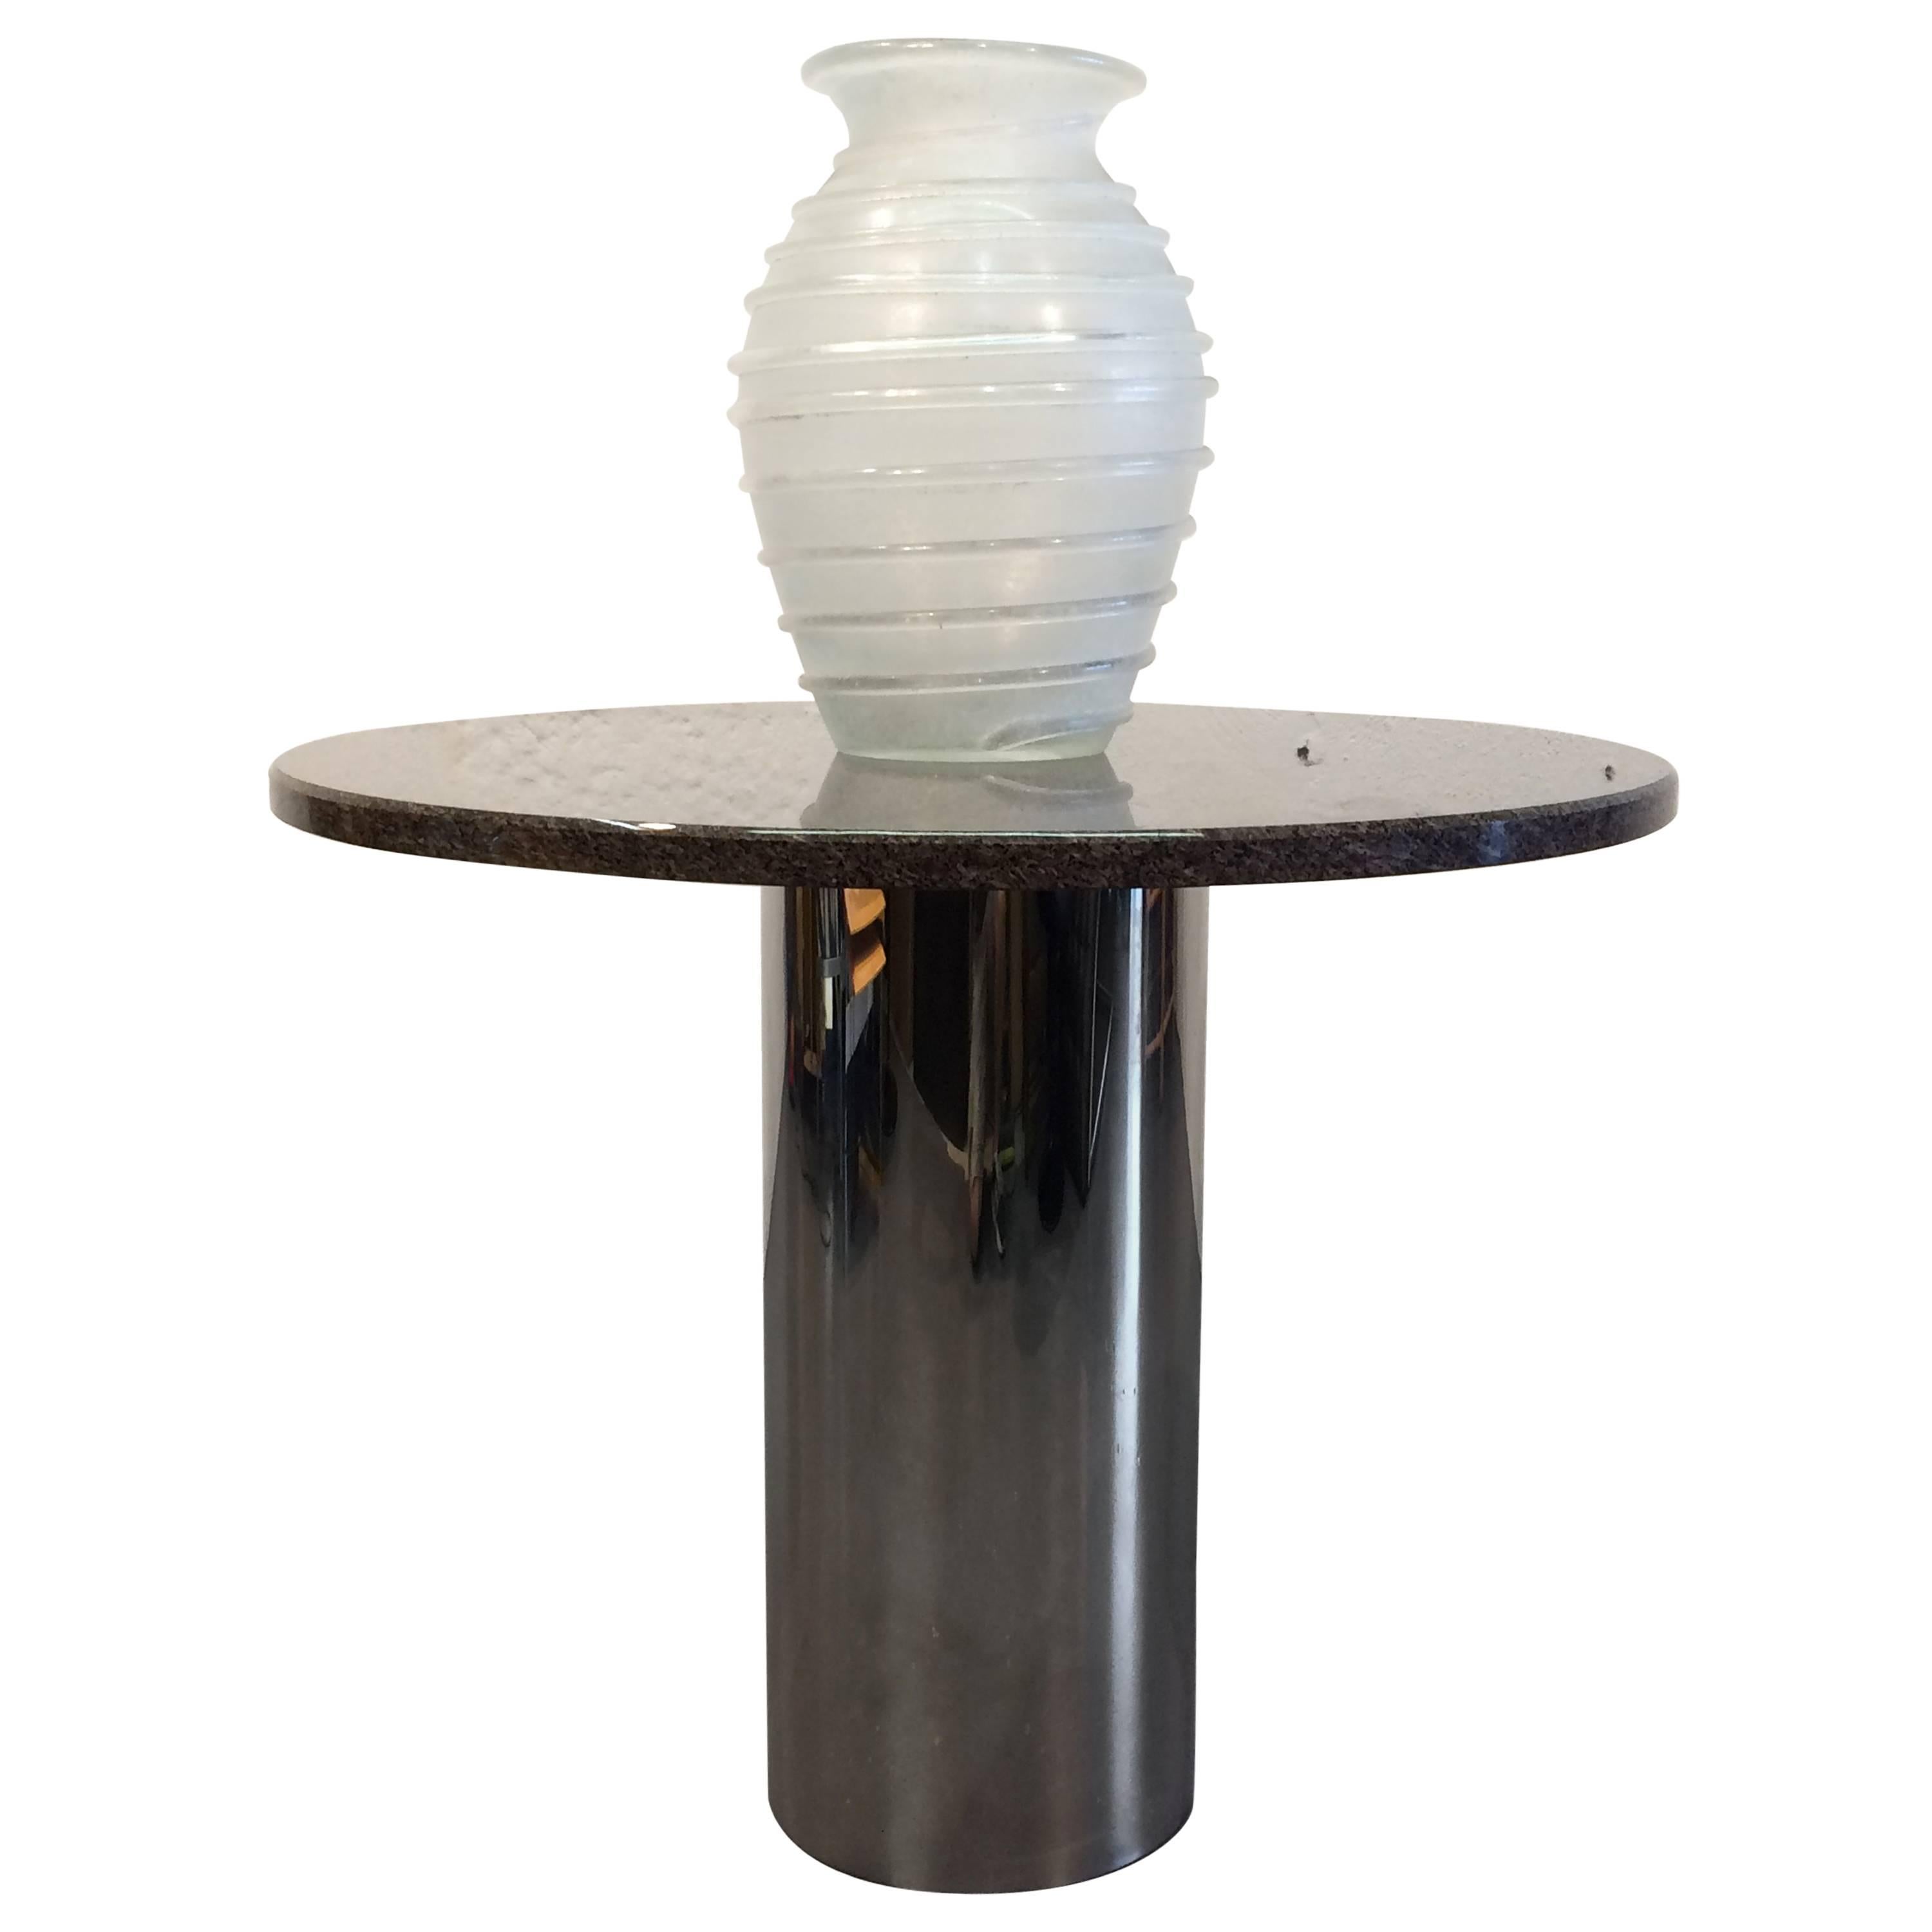 Stainless Steel and Granite Centre Table or Dining Table